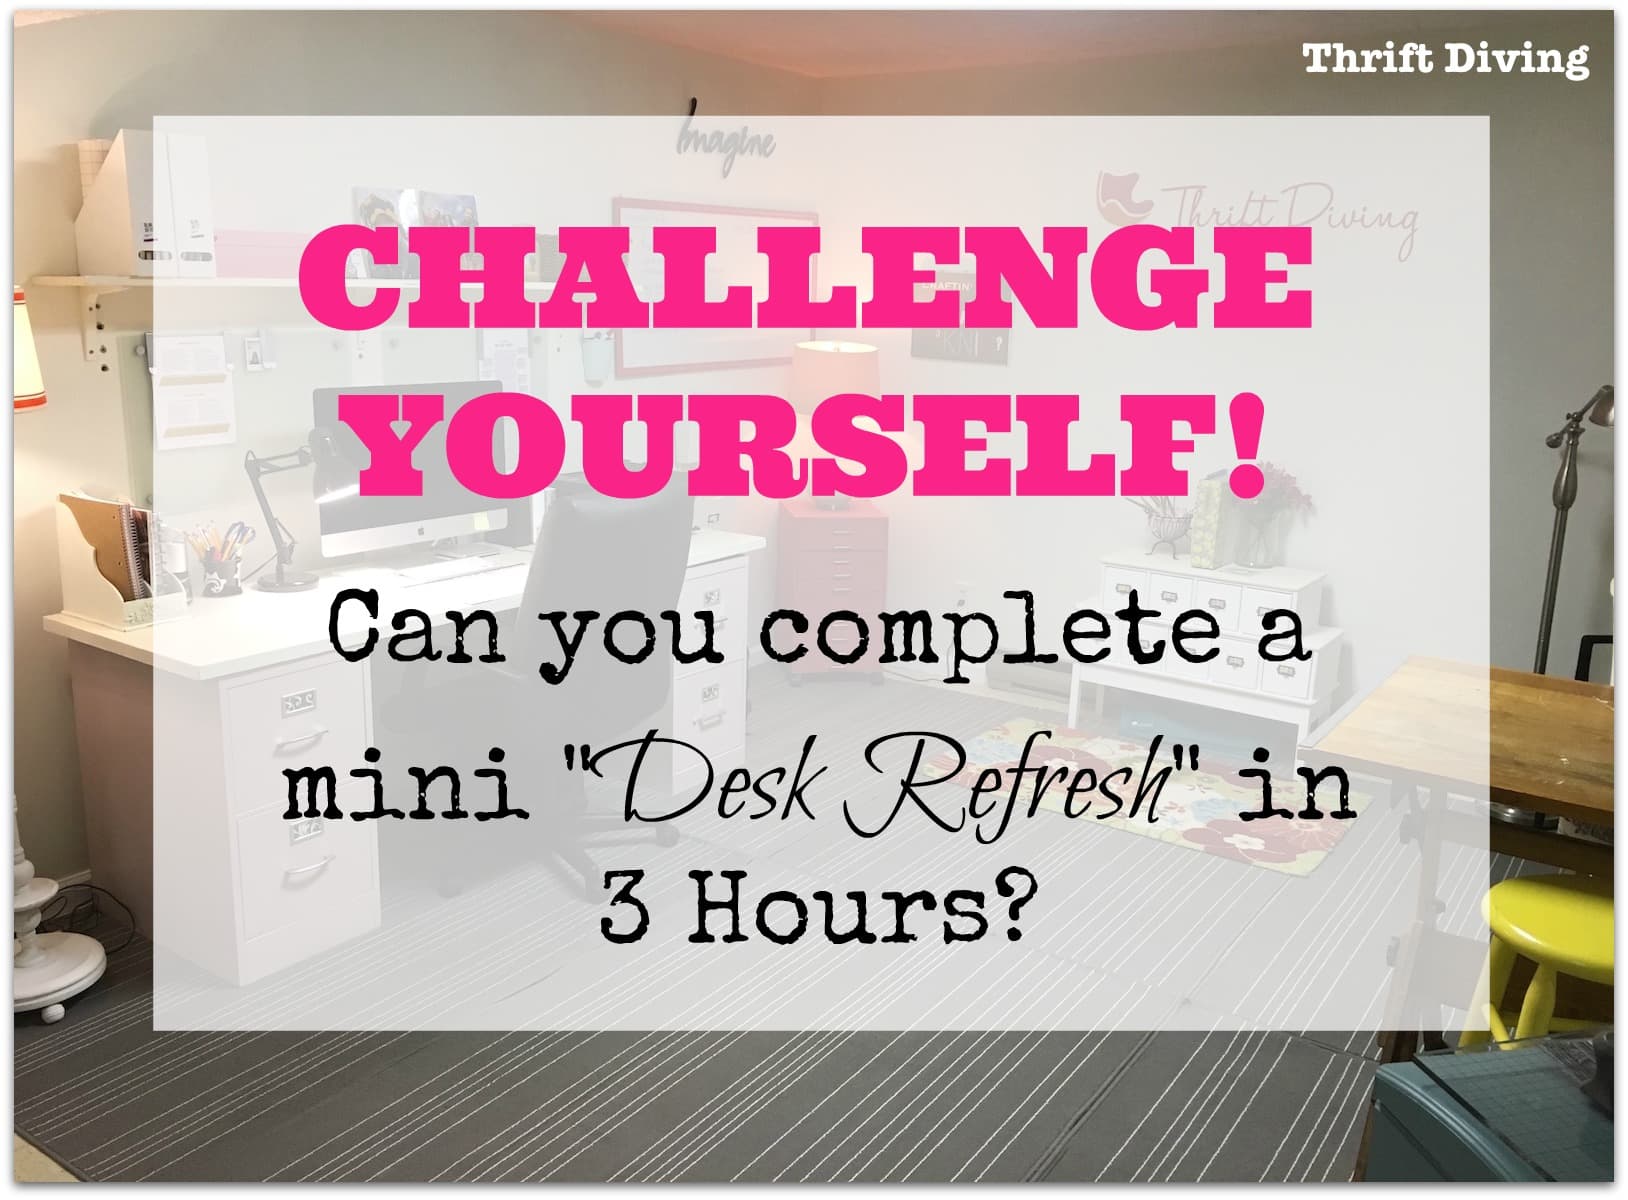 Challenge Yourself! Complete a mini desk refresh in just 3 hours! - Thrift Diving Blog